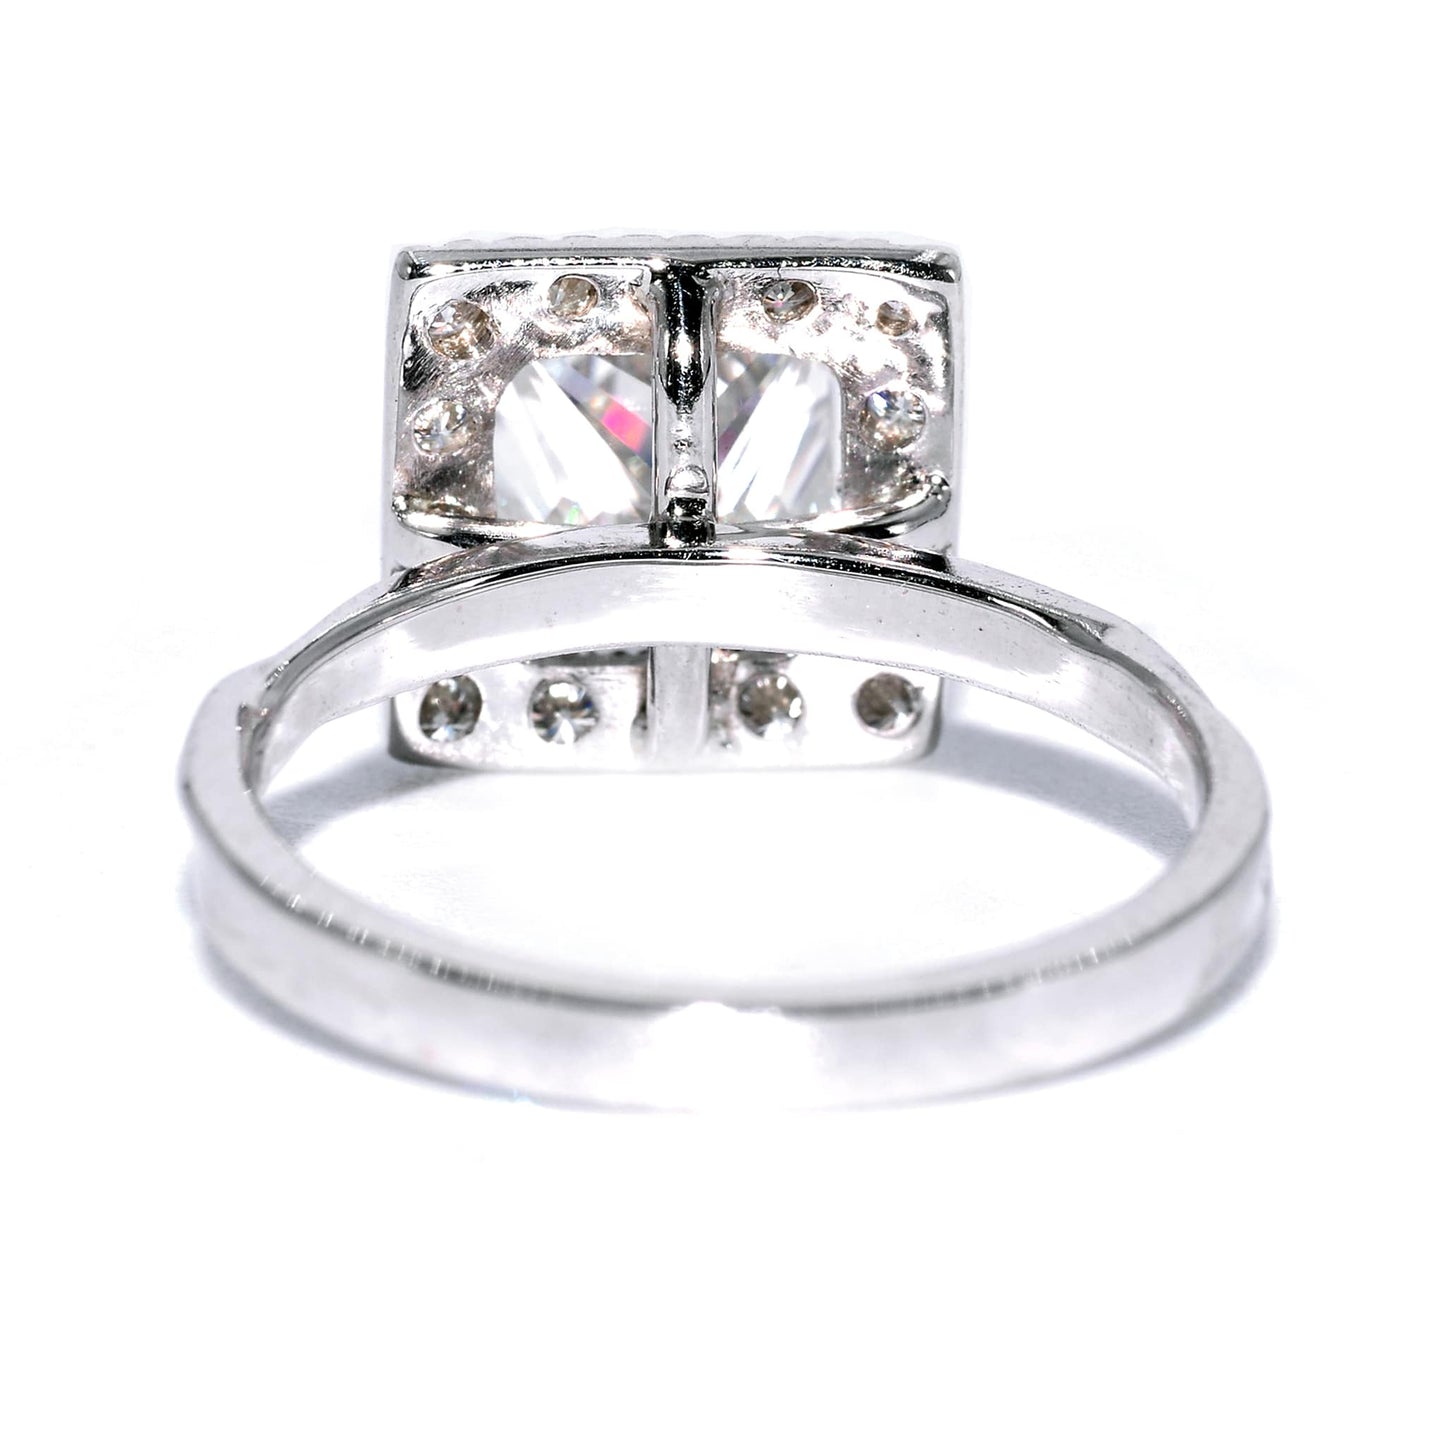 Construction view of the princess cut moissanite ring